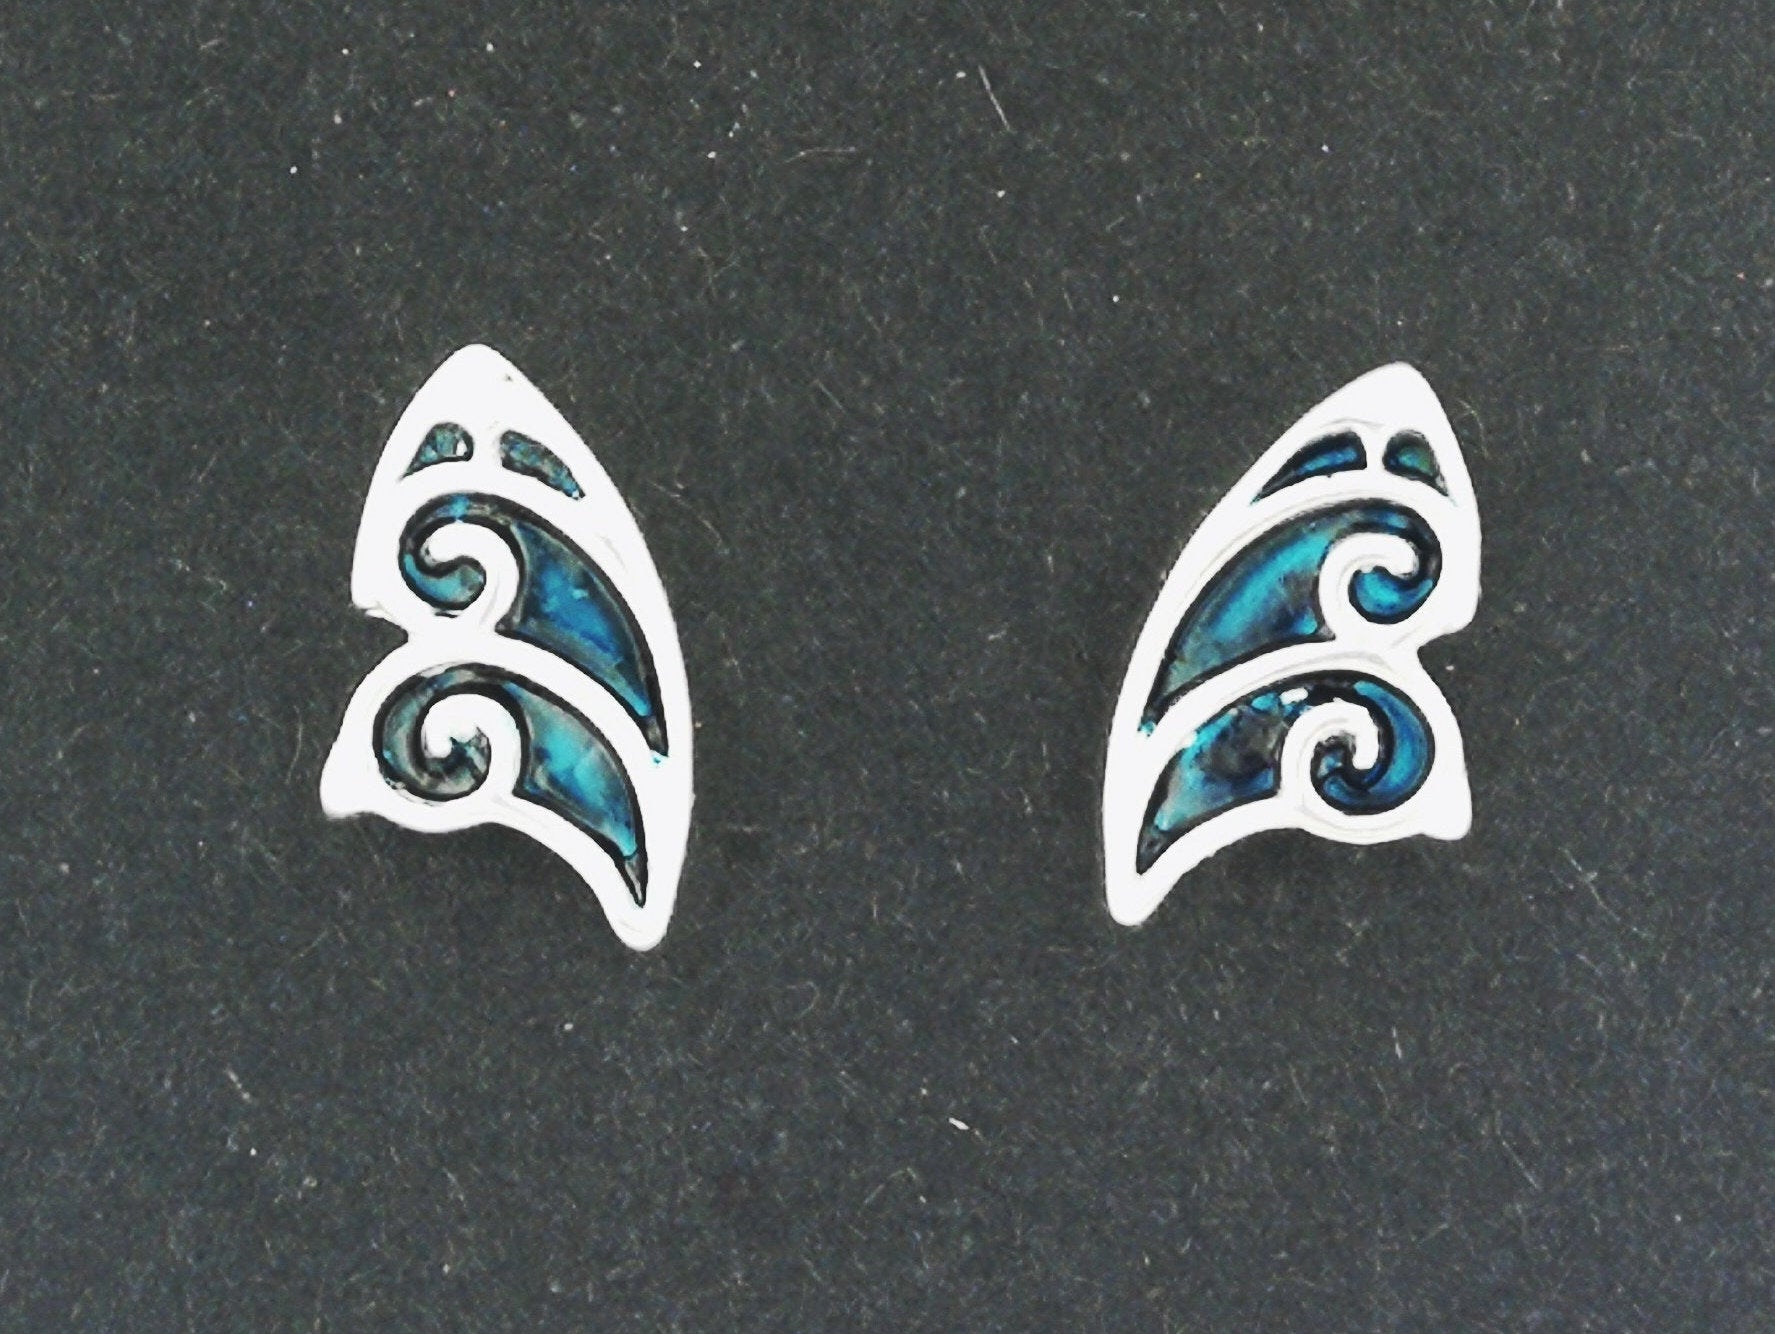 Fairy Butterfly Wing Stud Earrings in Sterling Silver, Sterling Silver Wings, Silver Wing Earrings, Fantasy Stud Earrings, Magic and Myth, Fairy Wing Studs, Fairy Stud Earrings, Fairy Wing Stud Earrings, Silver Fairy Jewelry, Silver Fairy Jewellery, Enameled Fairy Wings, Enameled Fairy Jewelry, Enameled Fairy Jewellery, Butterfly Wing Earrings